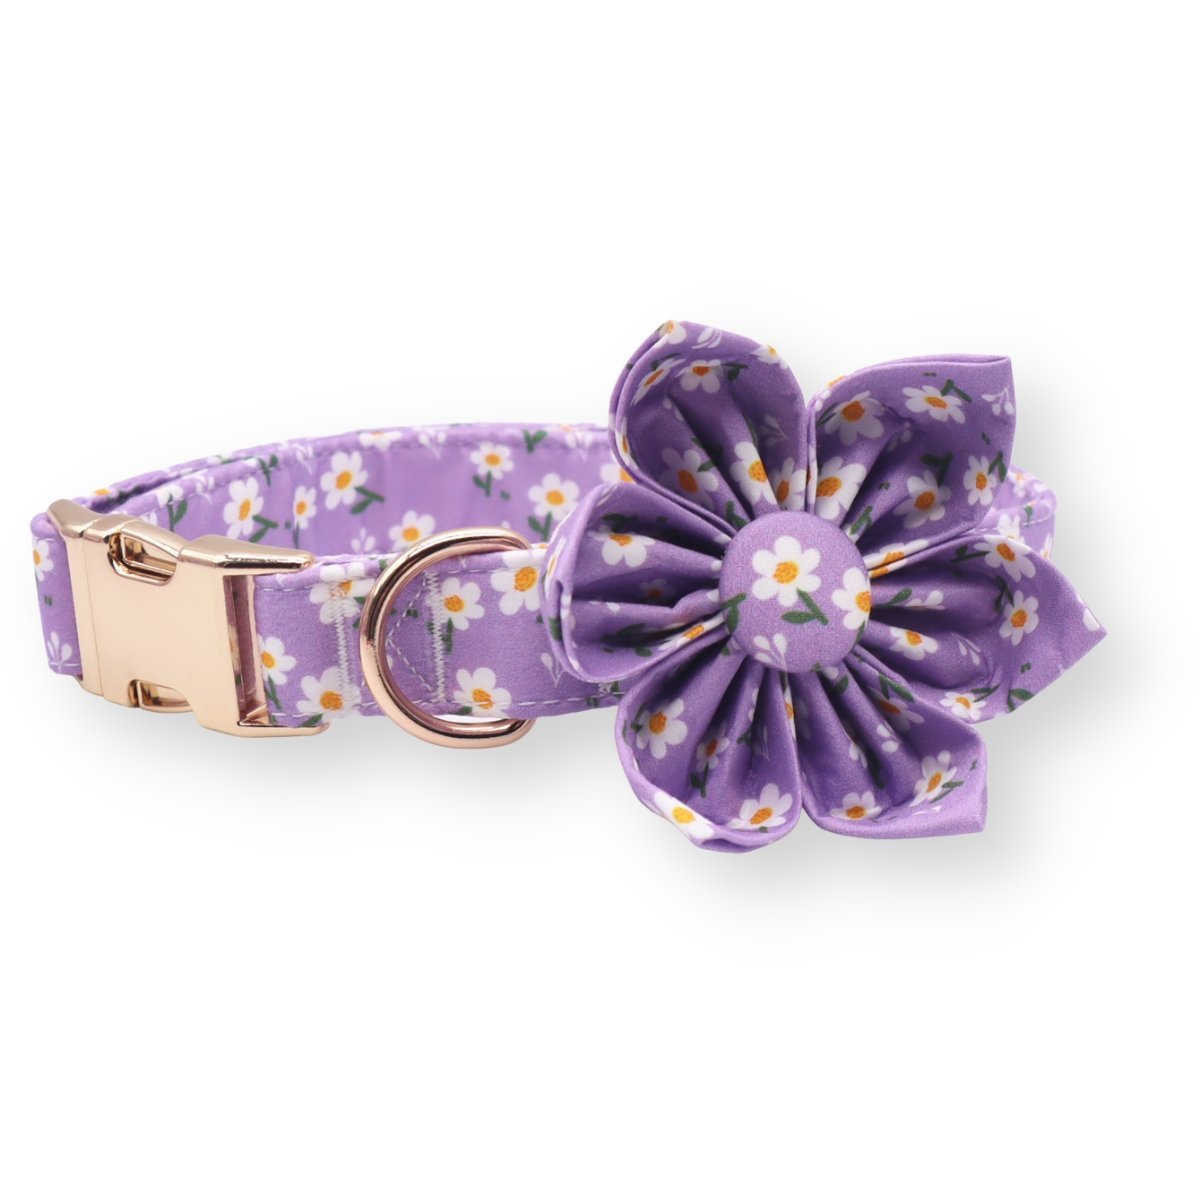 flower collar for dog wedding with matching leash - dog flower collar with name - dog flower collars and leash set for wedding - dog collars and leash canada